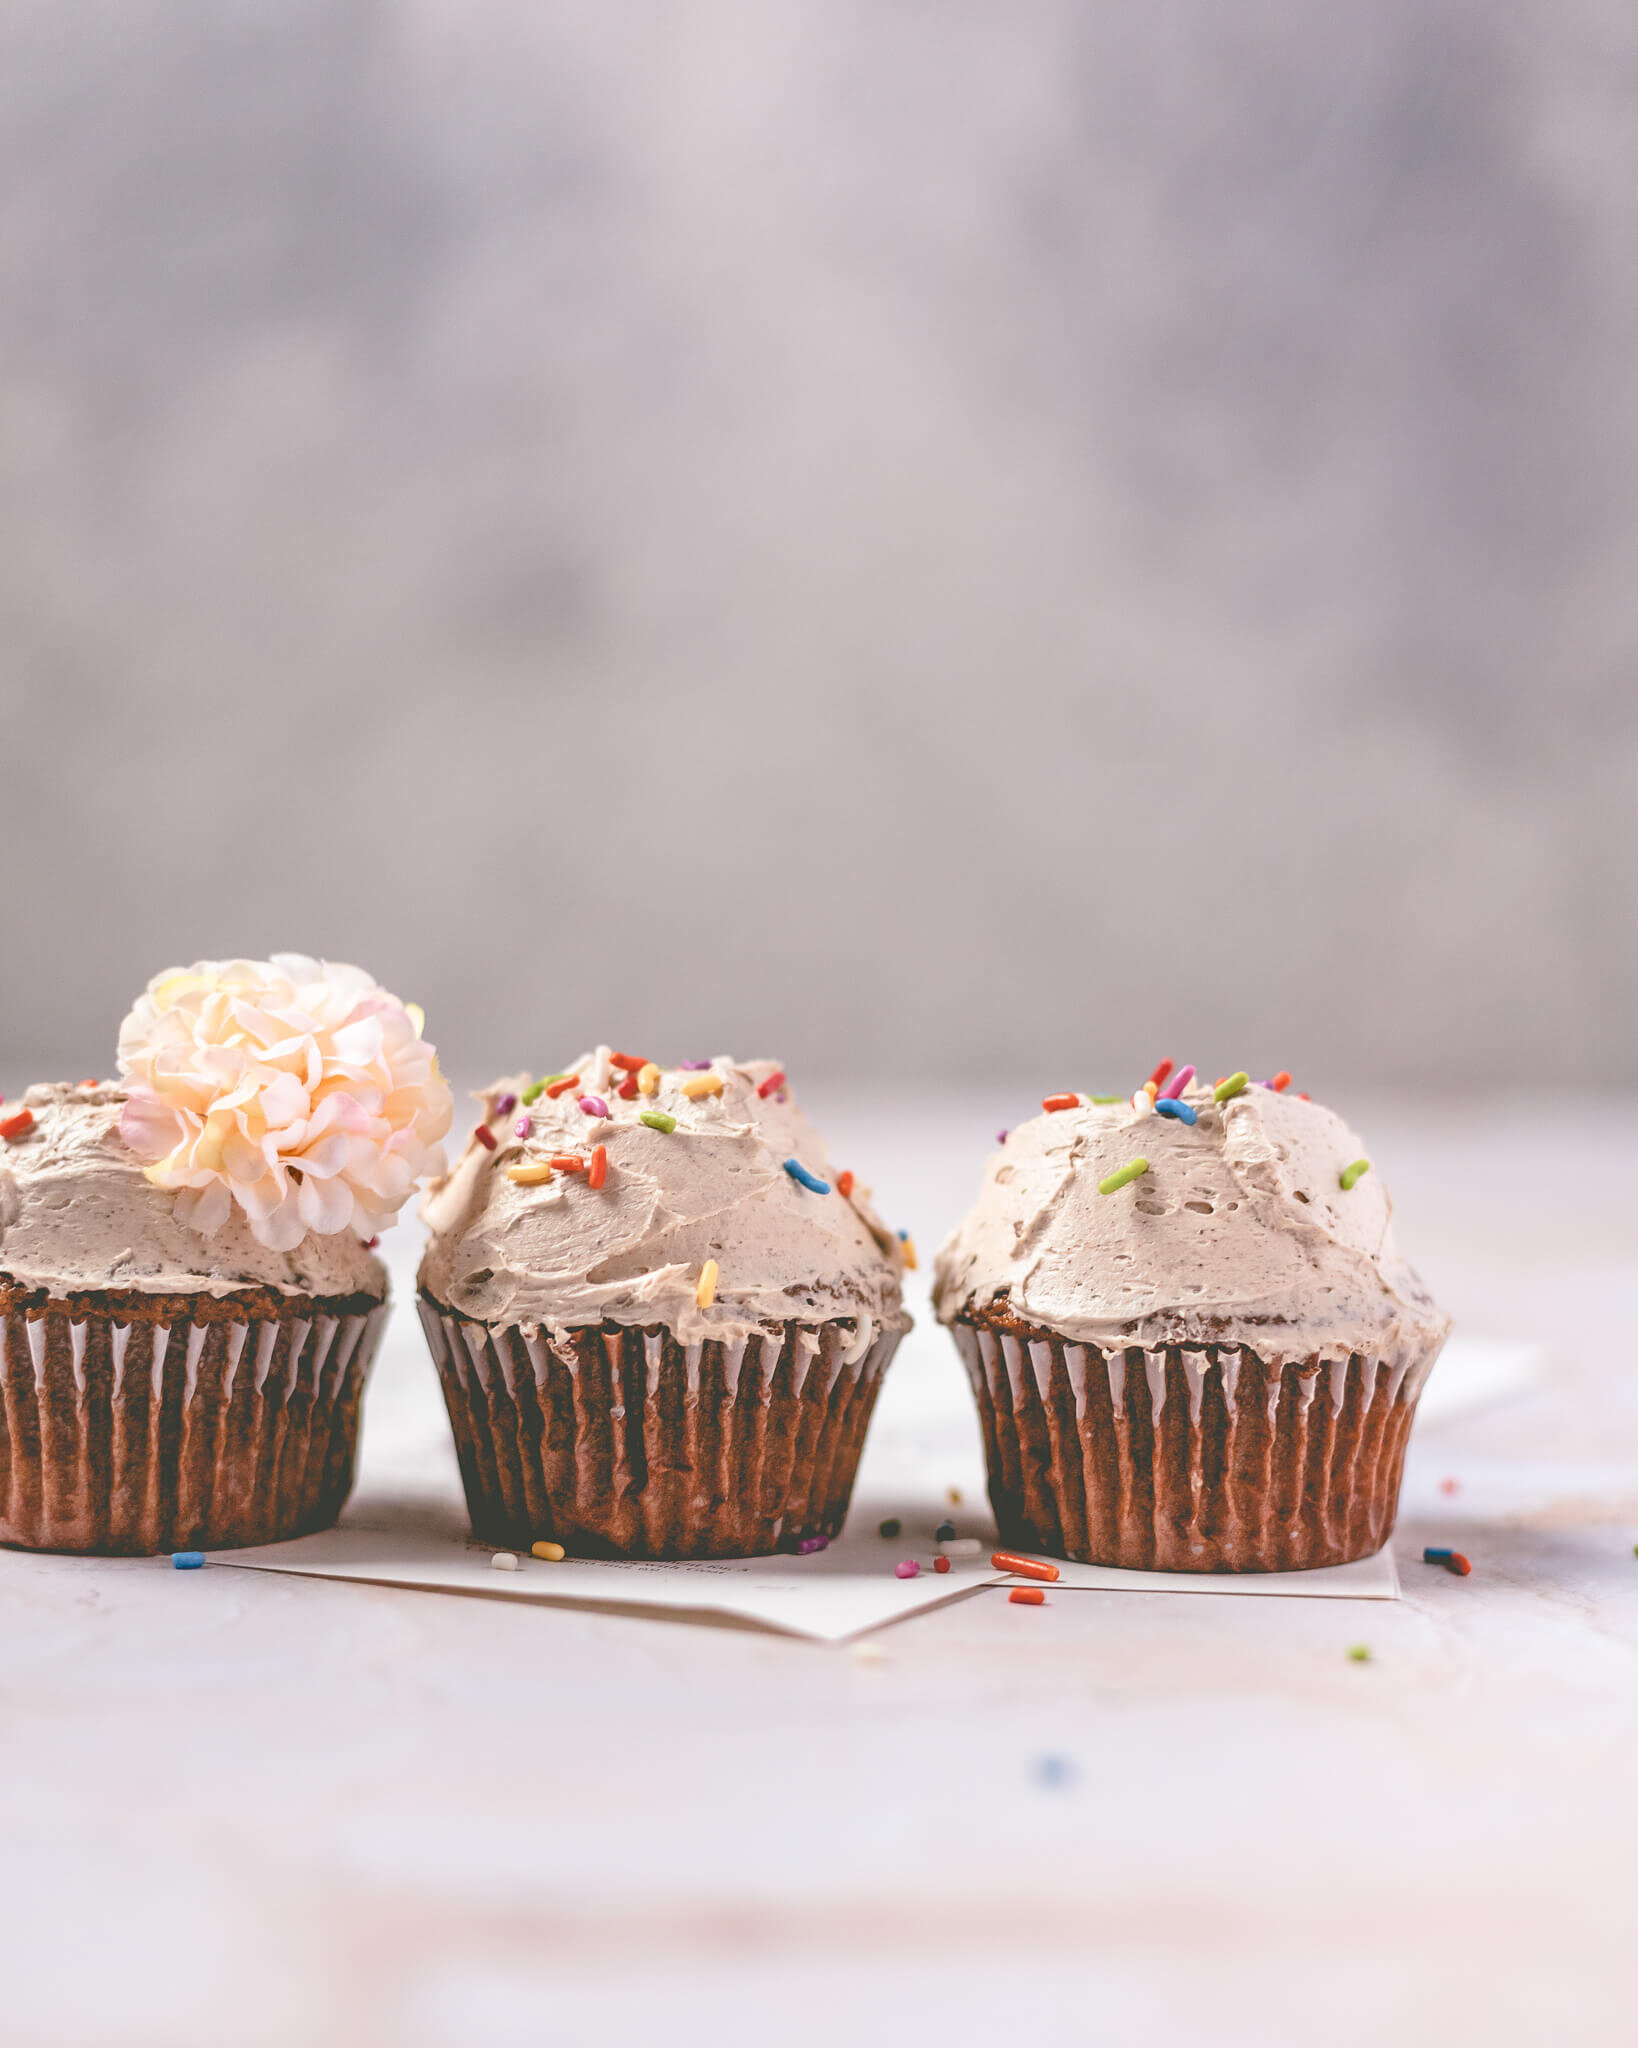 How to Photograph Cupcakes